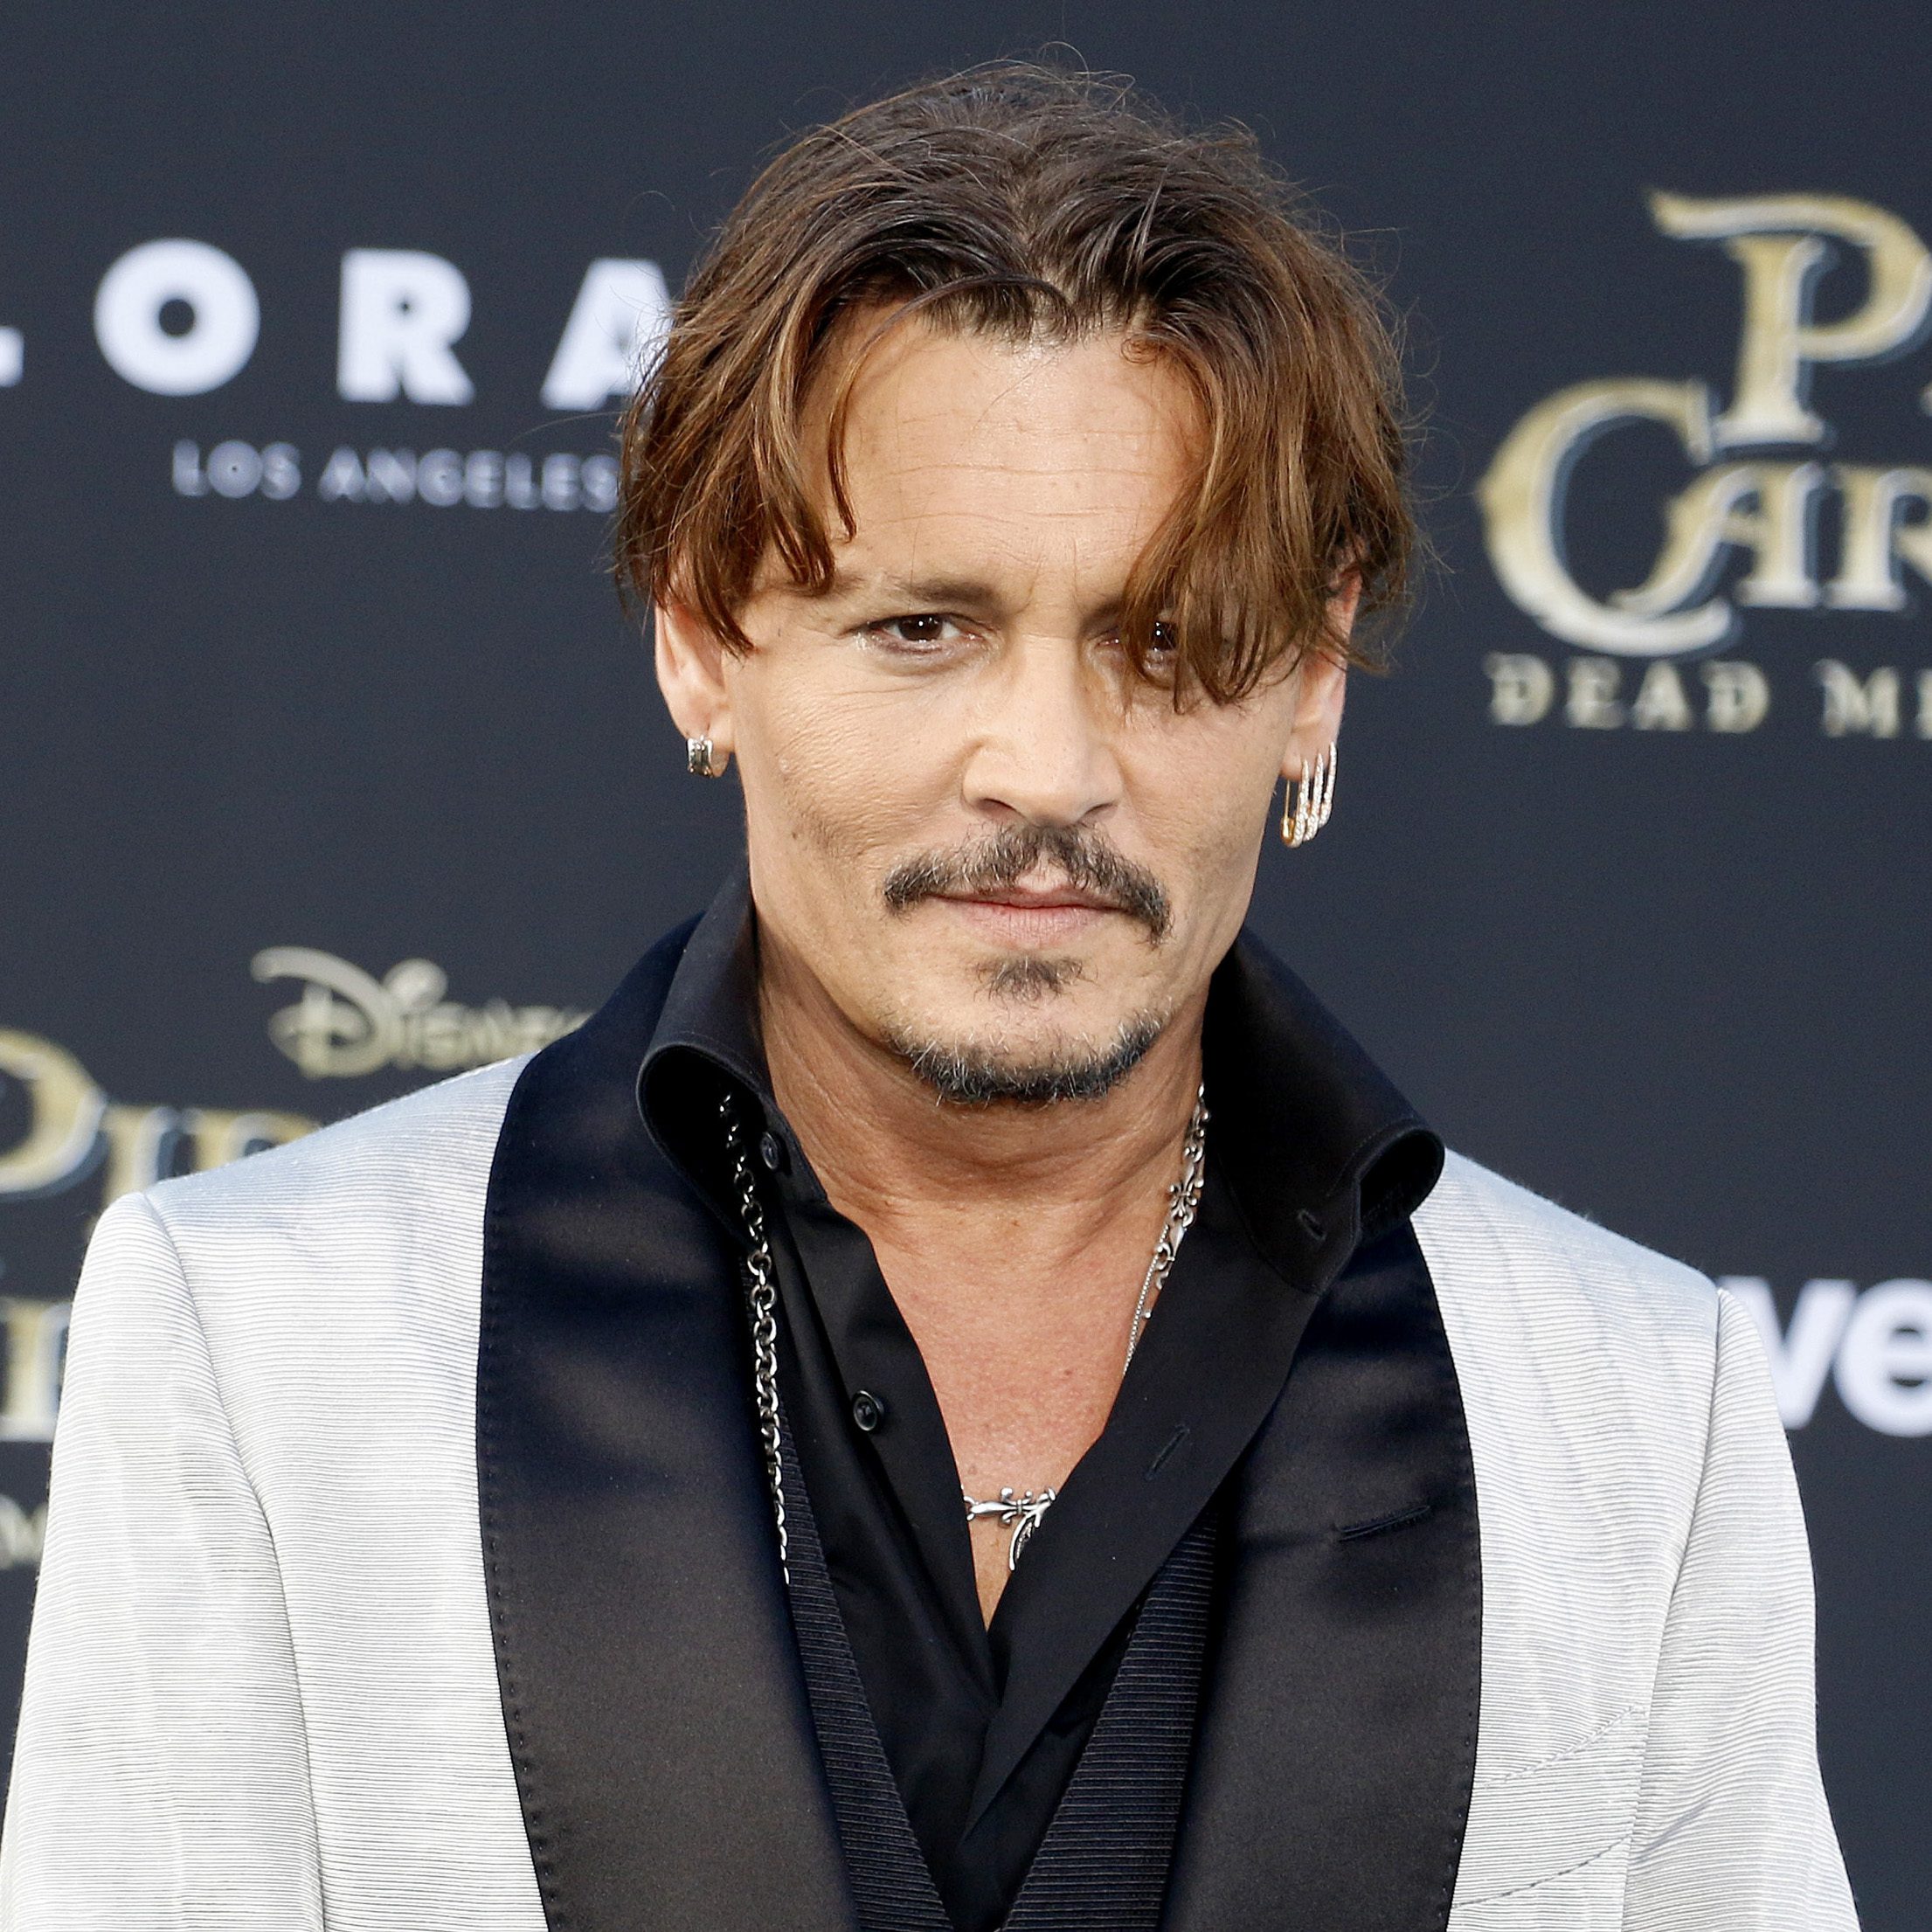 Johnny Depp As The New face of Christian Dior Parfums